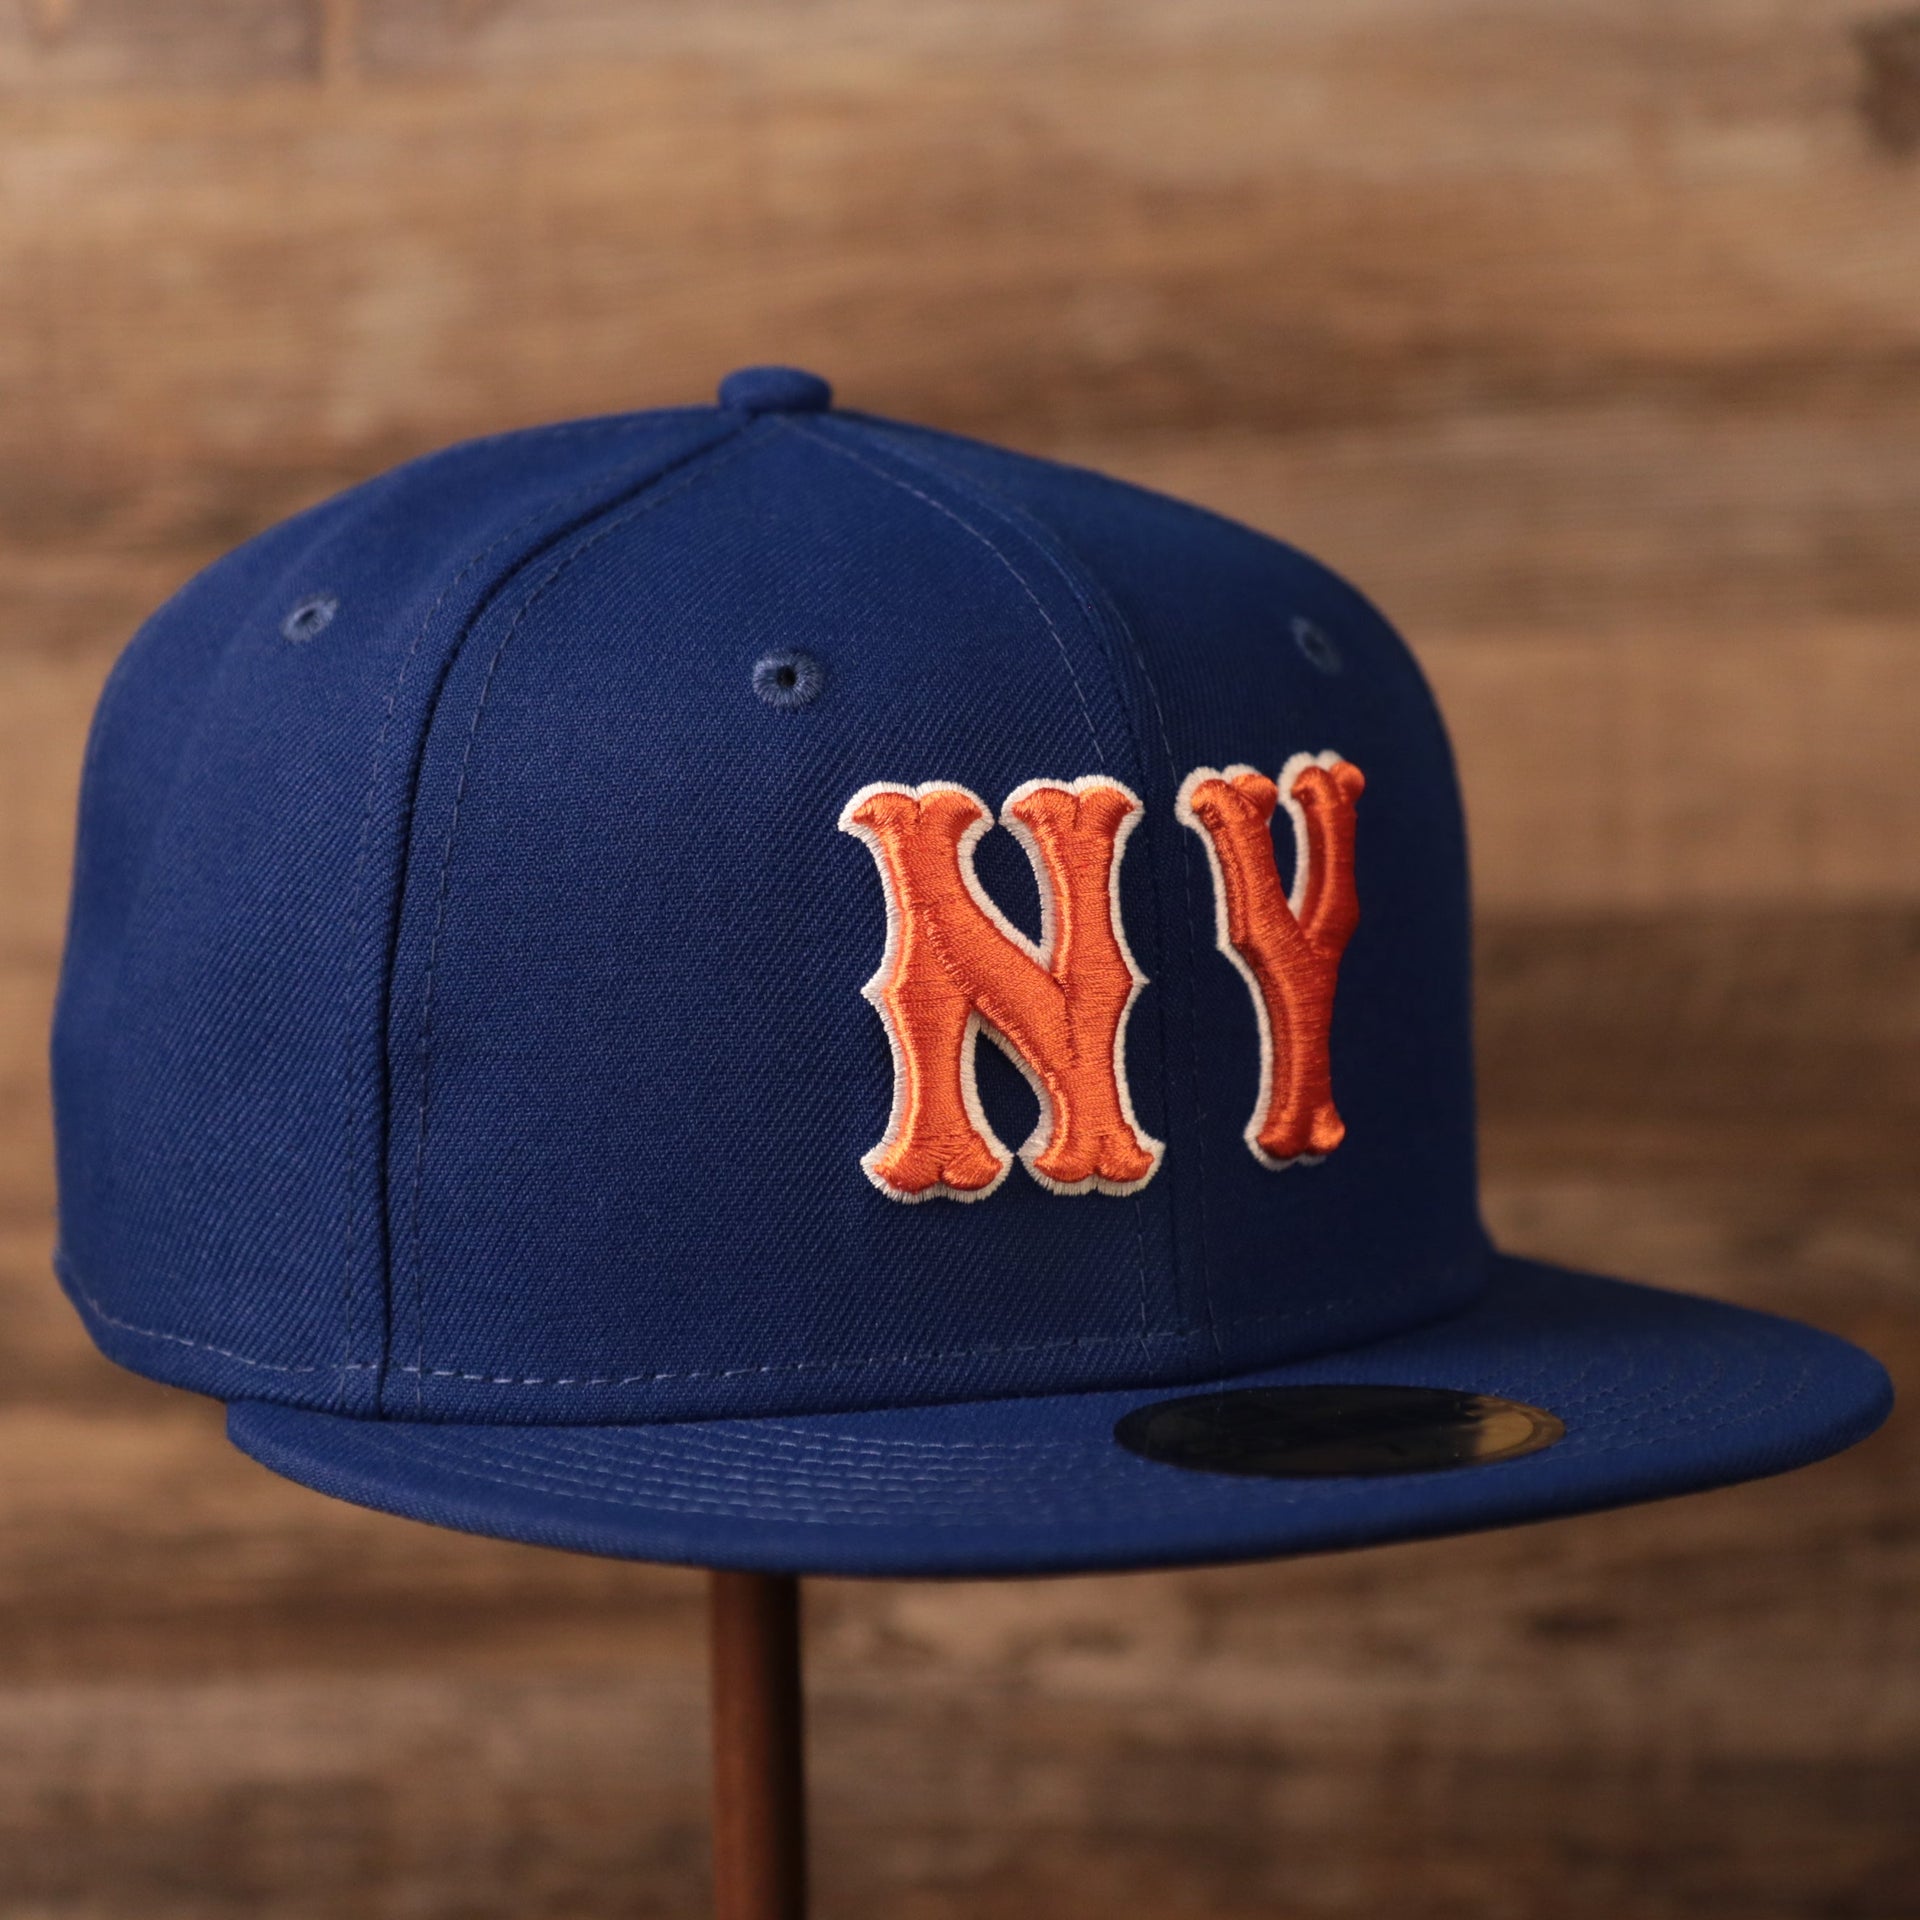 The blue New Era fitted cap has the logo of the Mets on the front side of the blue side patch fitted hat.